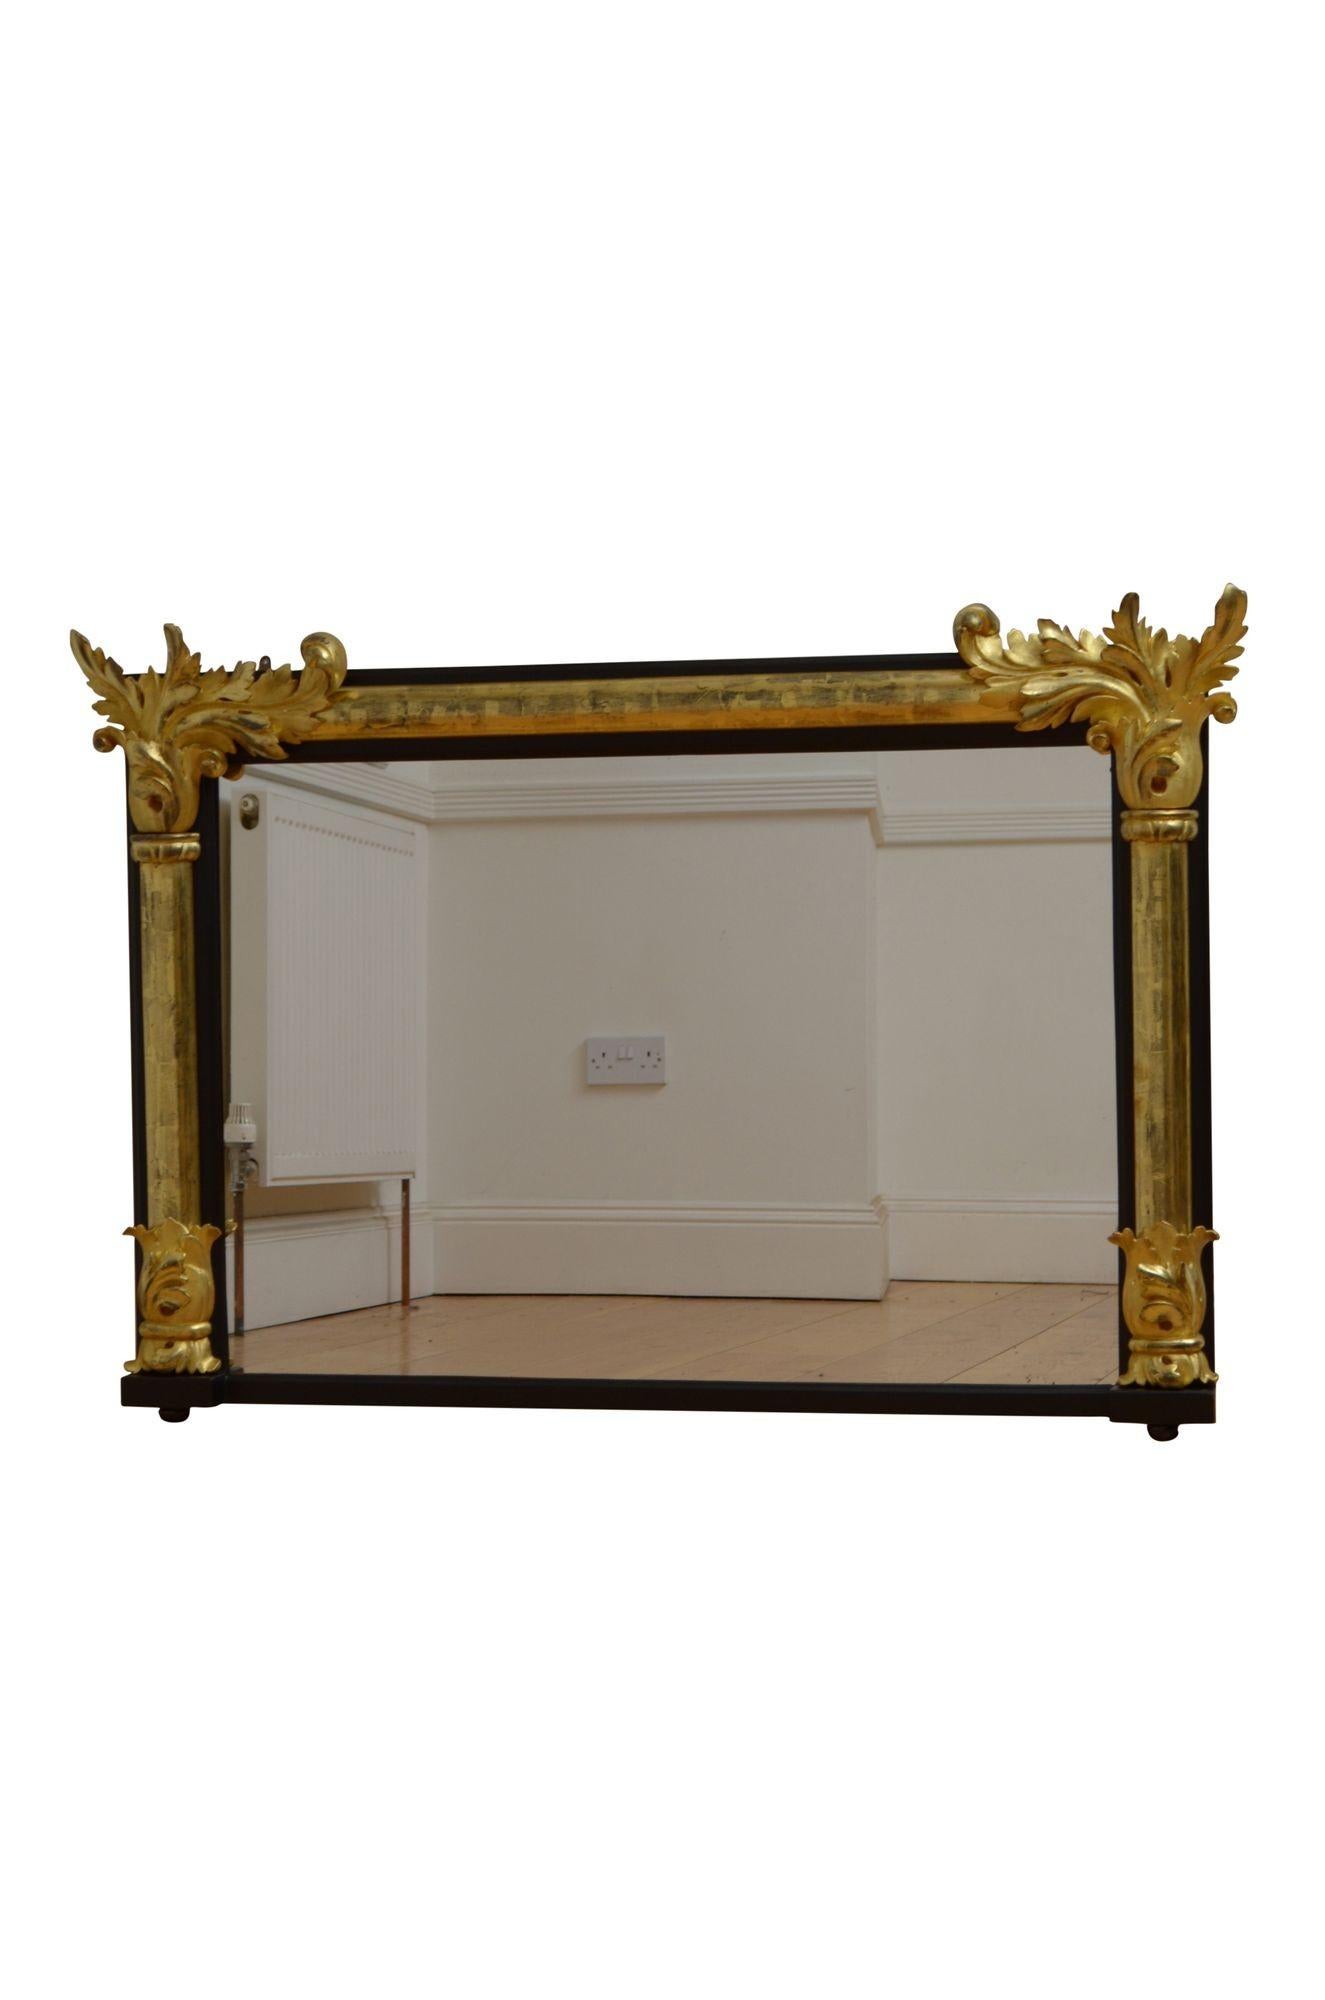 K0545 Very elegant English gilded wall mirror, having an old mirror plate with minor imperfections in ebonised moulded frame with giltwood half columns finish with carved capitals and acanthus leaves to the top corners. This antique mirror is in